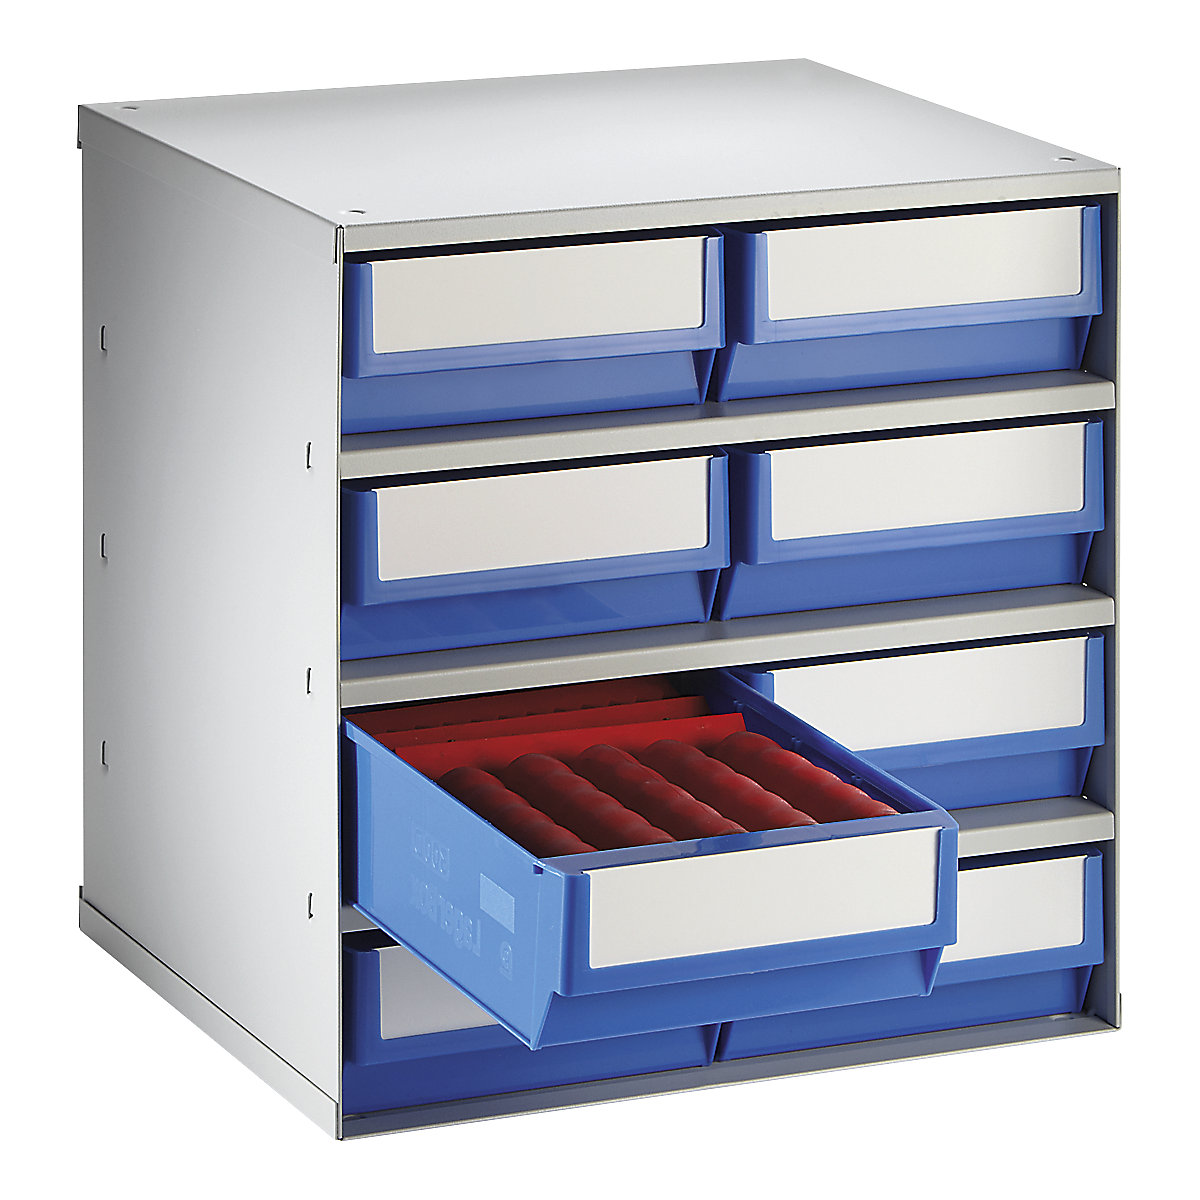 Drawer cabinet, max. housing load 75 kg, HxWxD 395 x 376 x 300 mm, 8 drawers, blue drawers-5